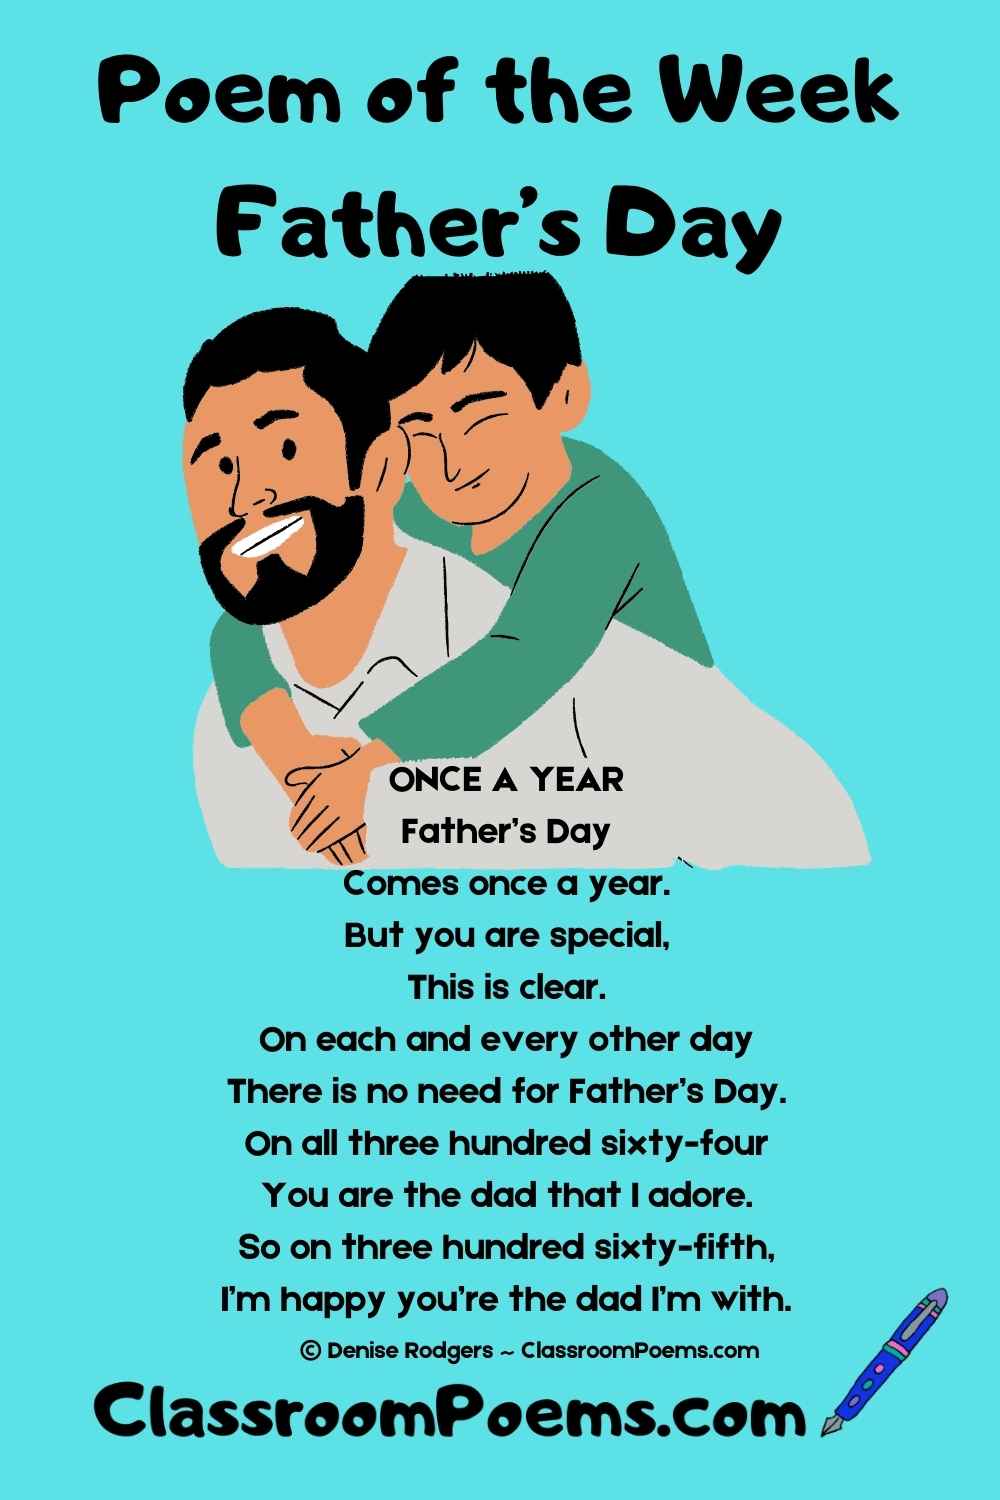 Father's Day poem by Denise Rodgers on ClassroomPoems.com.